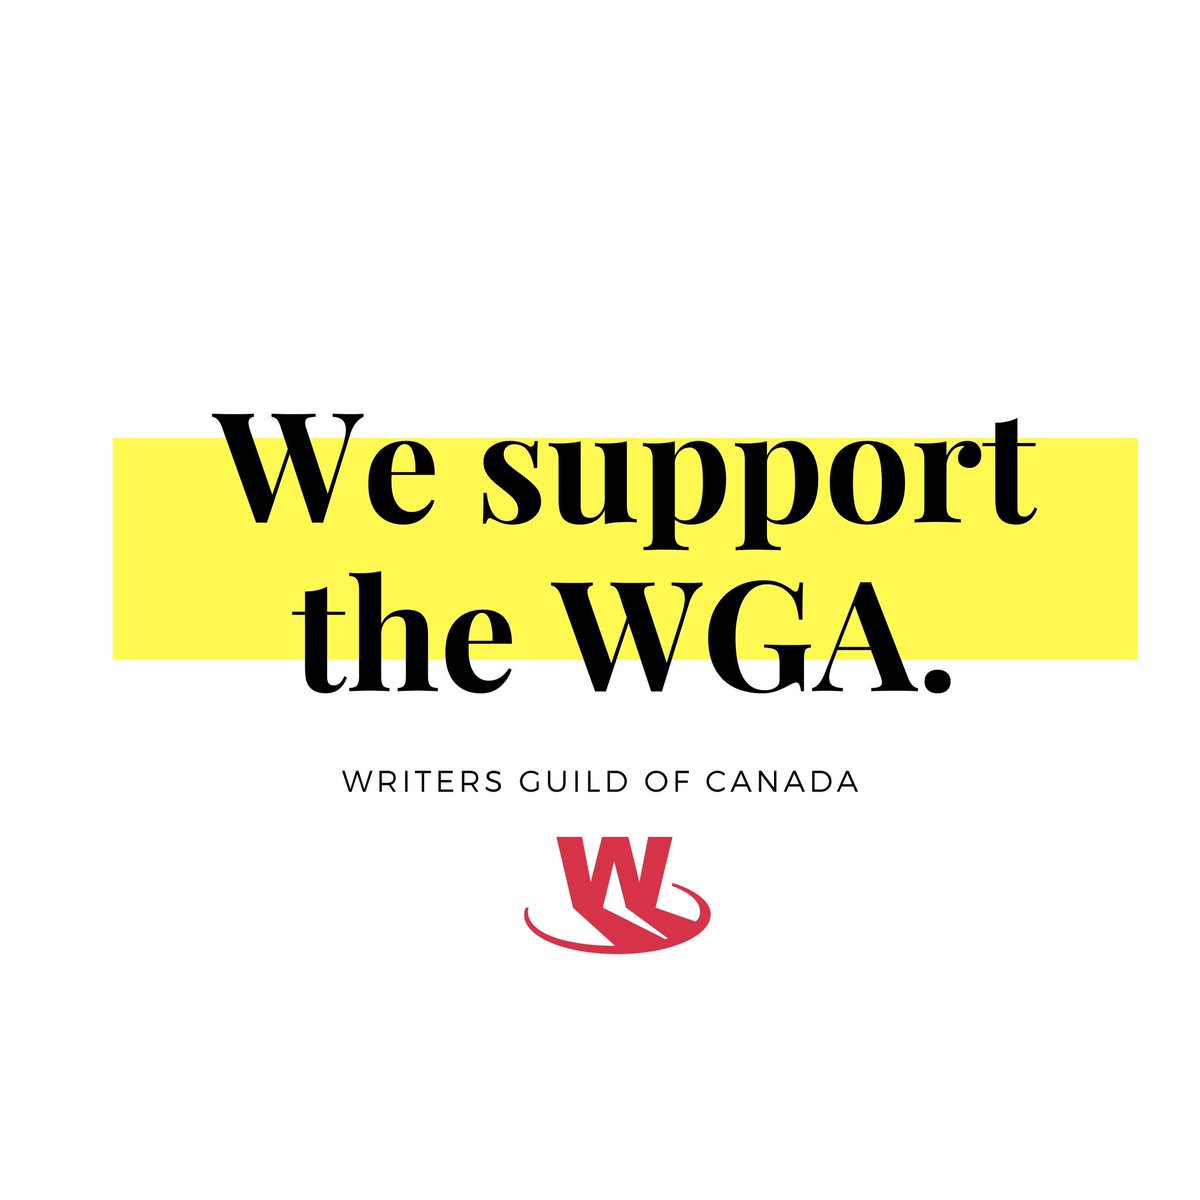 On June 14, the WGC is joining guilds + allies around the world for #ScreenwritersEverywhere—a global day of solidarity and action in support of the @WGAEast and @WGAWest #WGAstrike. Join us at our Toronto rally, or show your support online! Info: wgc.ca/sites/default/…